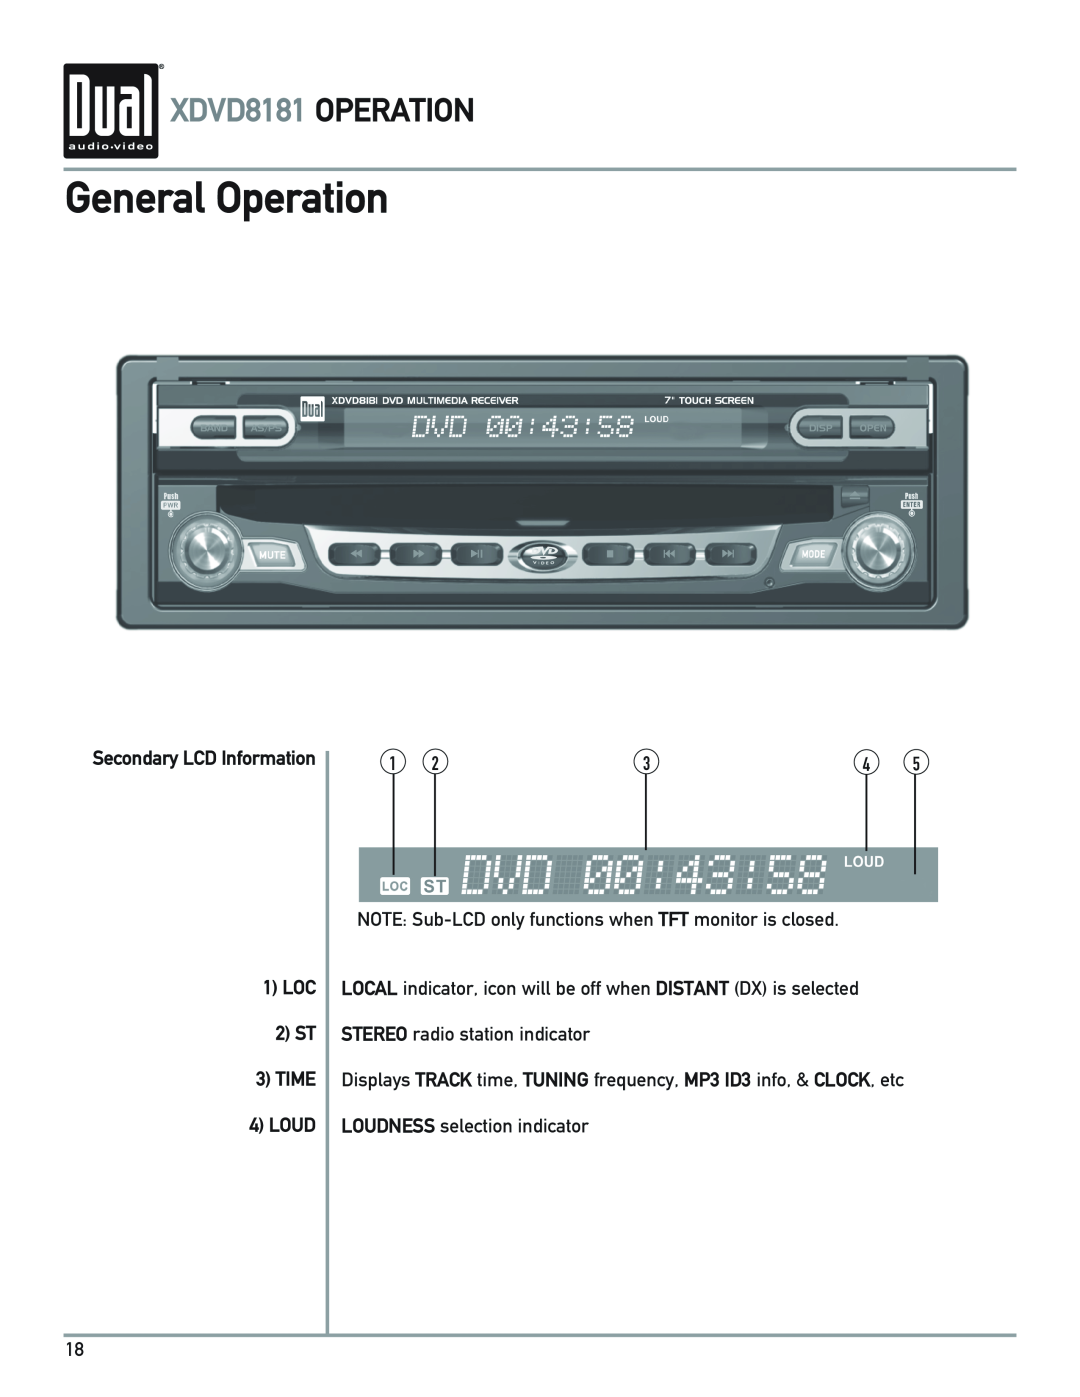 Dual owner manual General Operation, XDVD8181 OPERATION, Secondary LCD Information, 2 ST, 1 LOC 